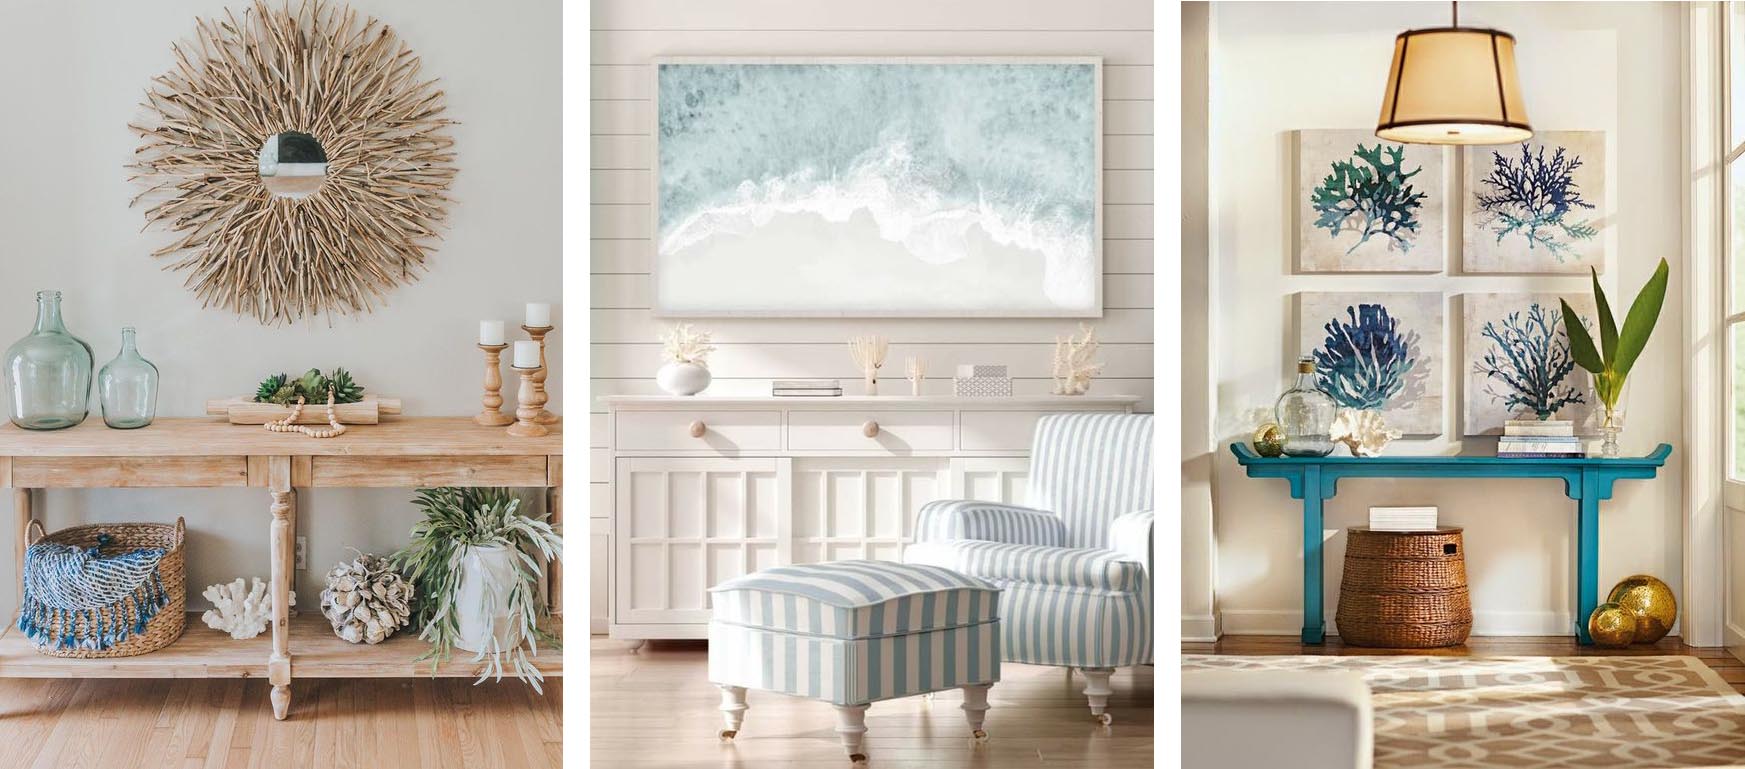 7 Ways to Decorate In A Coastal Living Style with Jenny Robert Exclusive Decor